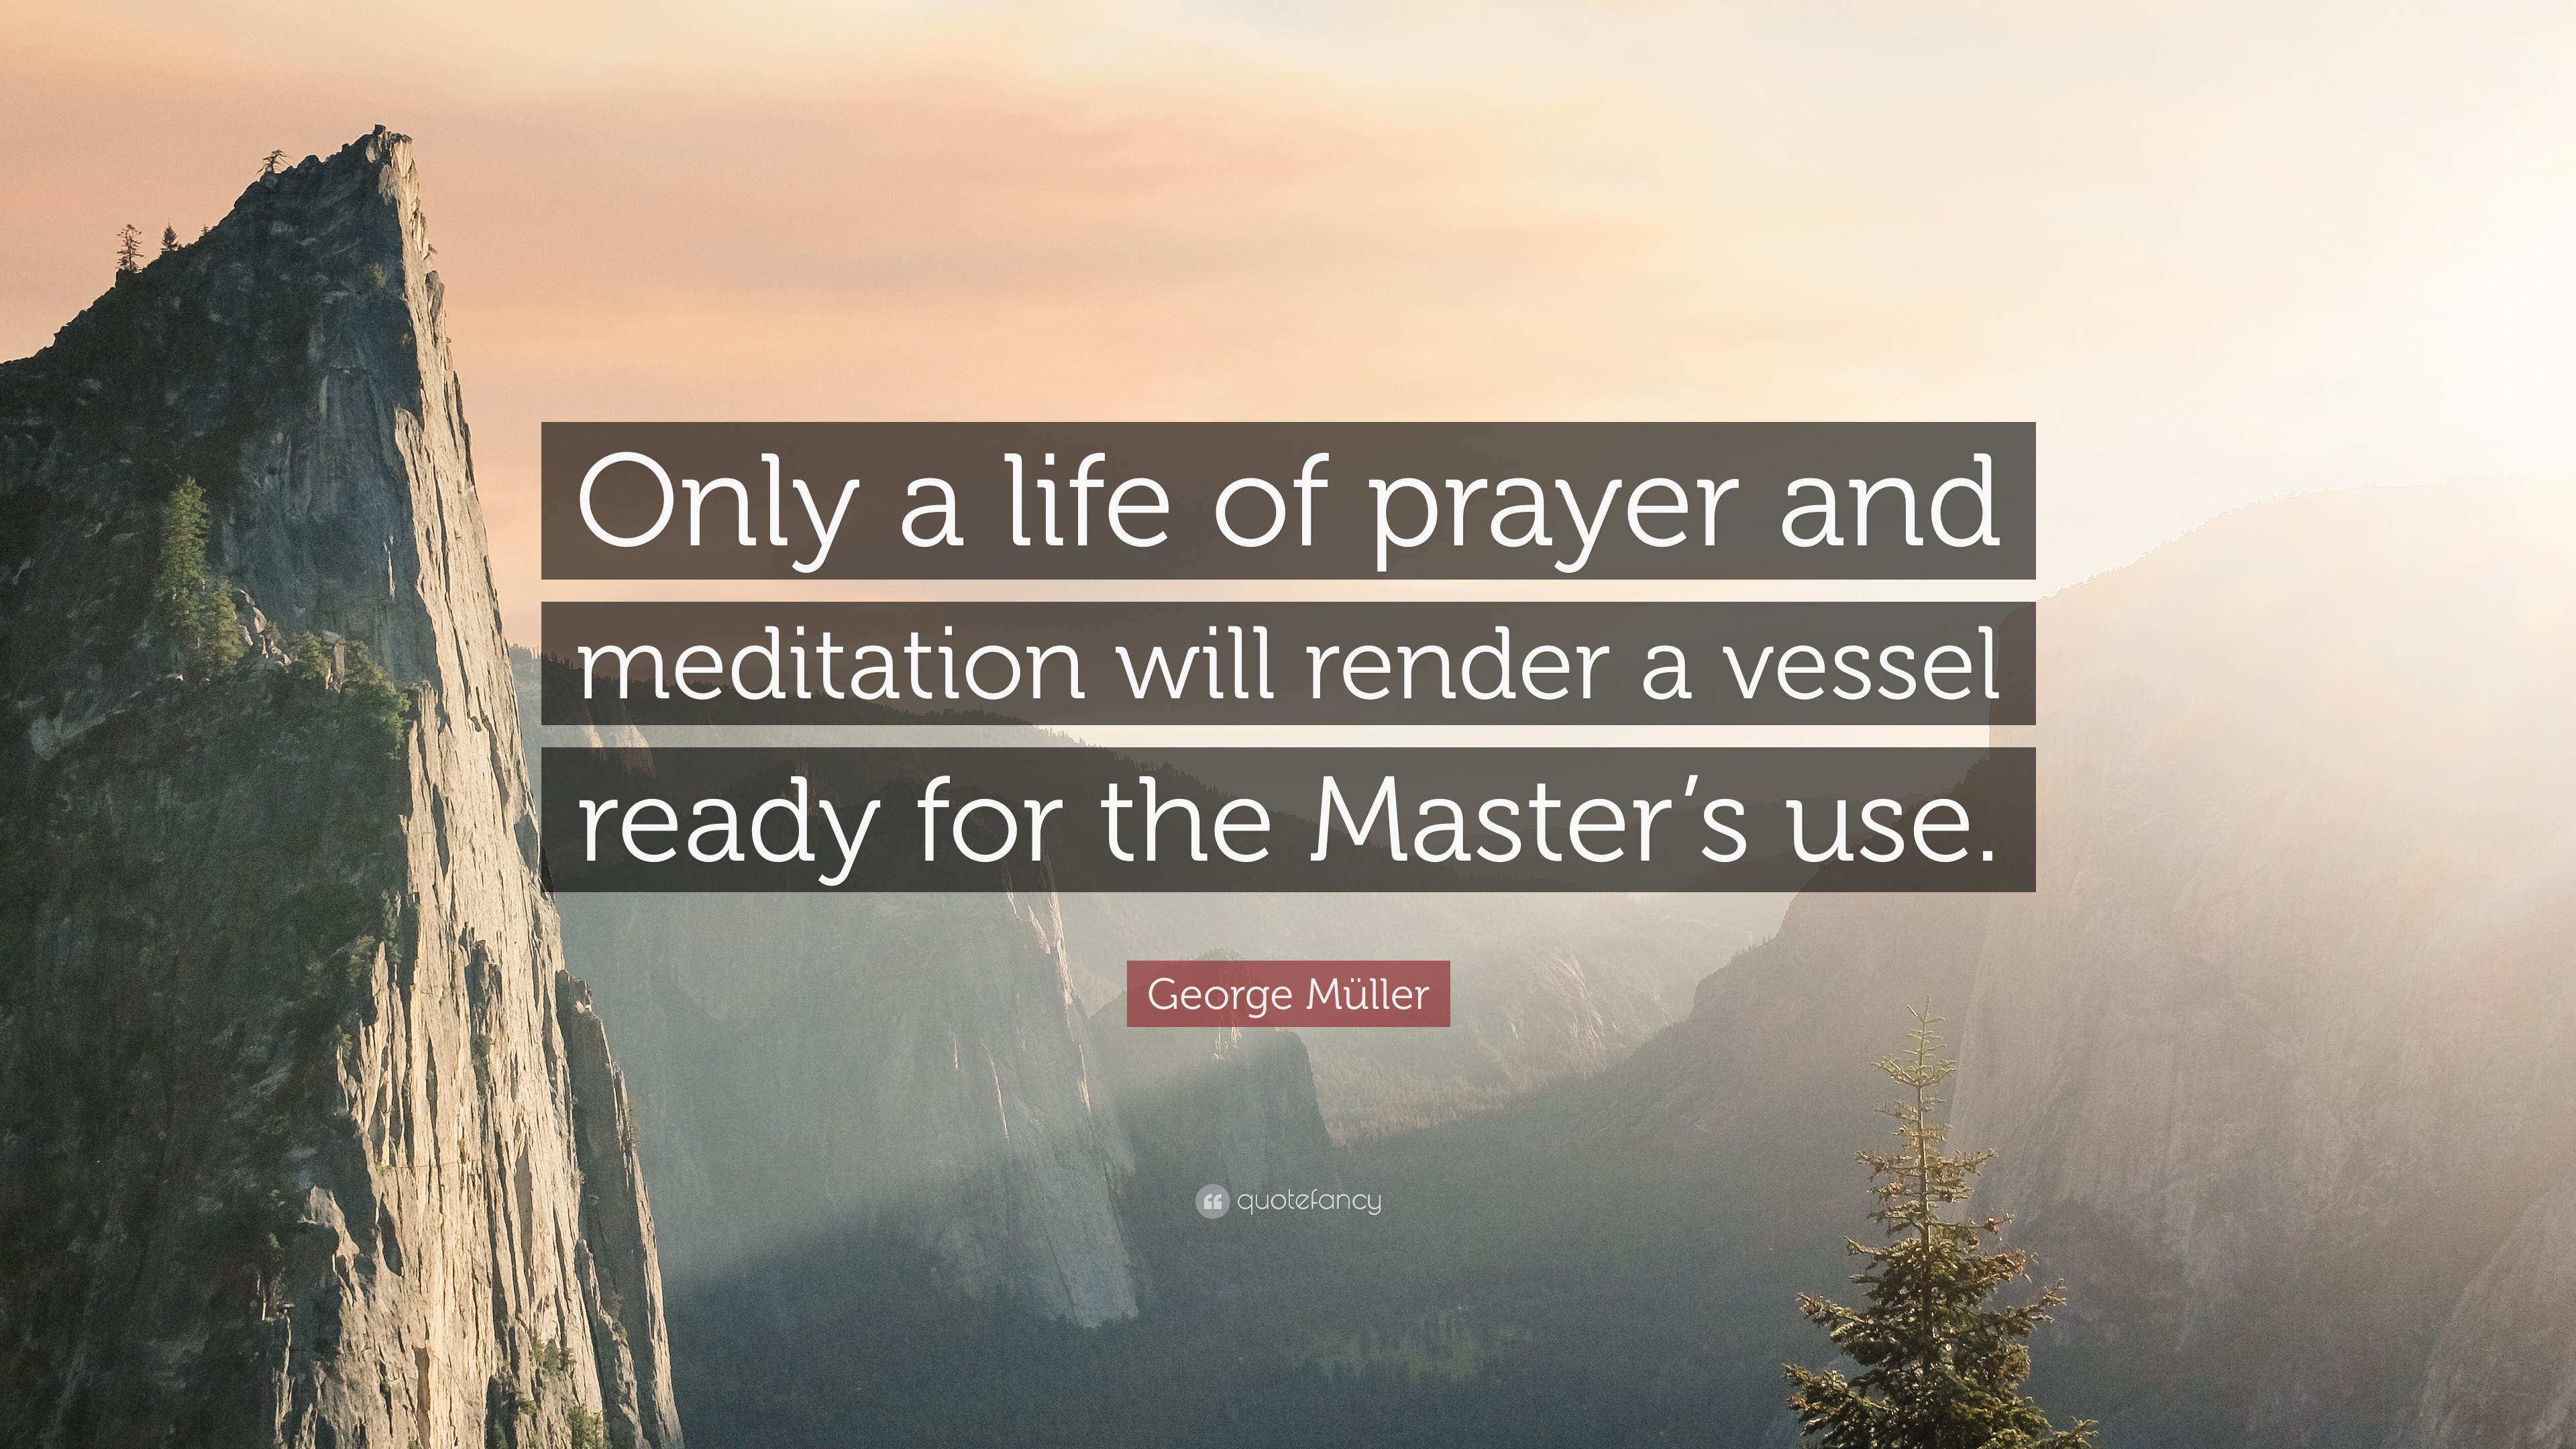 Müller Quote “Only a life of prayer and meditation will render